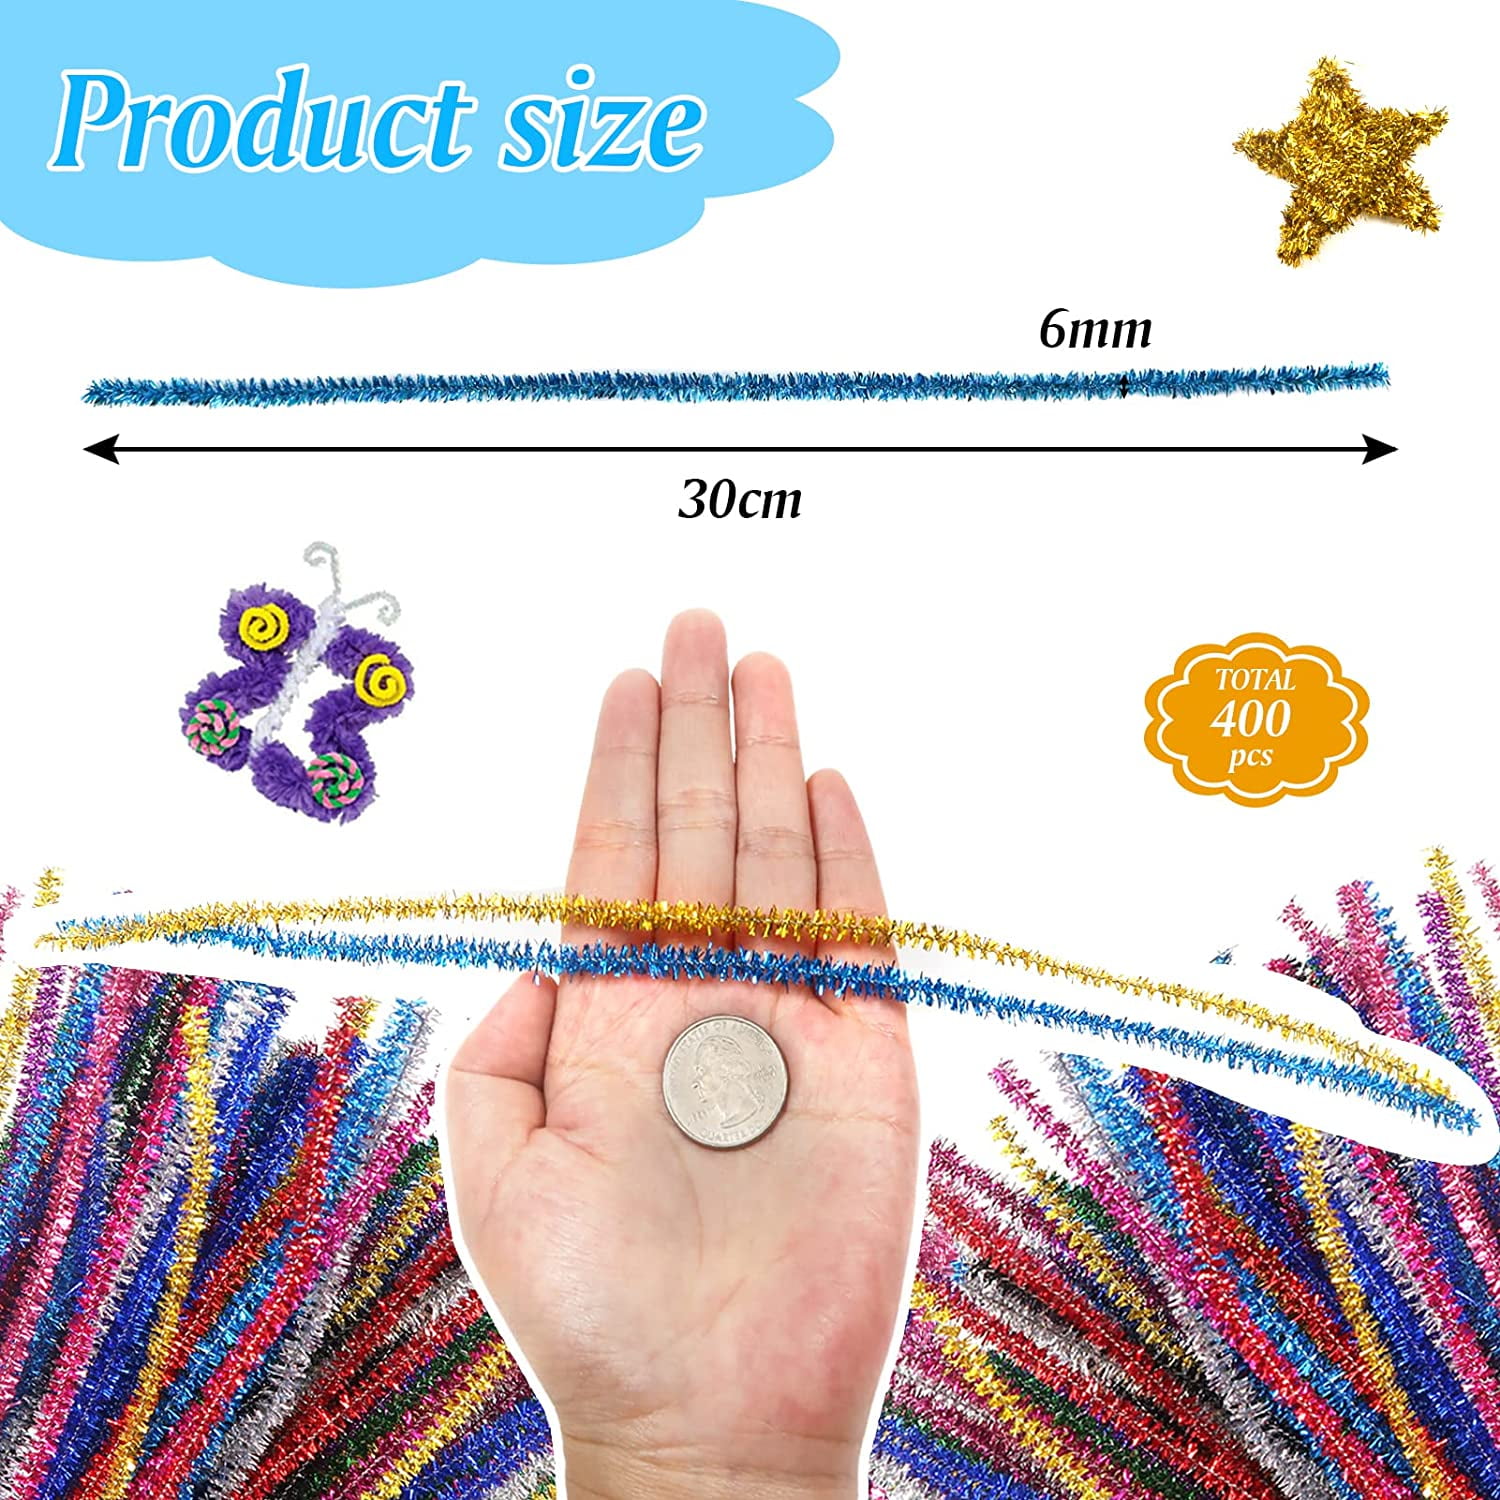 100Pcs Sparkly Pipe Cleaners Tinsel Pipe Cleaner Bulk Chenille Stems  Glitter Pipe Cleaners for Kids Craft Art DIY(6mm x 12inch, 10 Colors) 